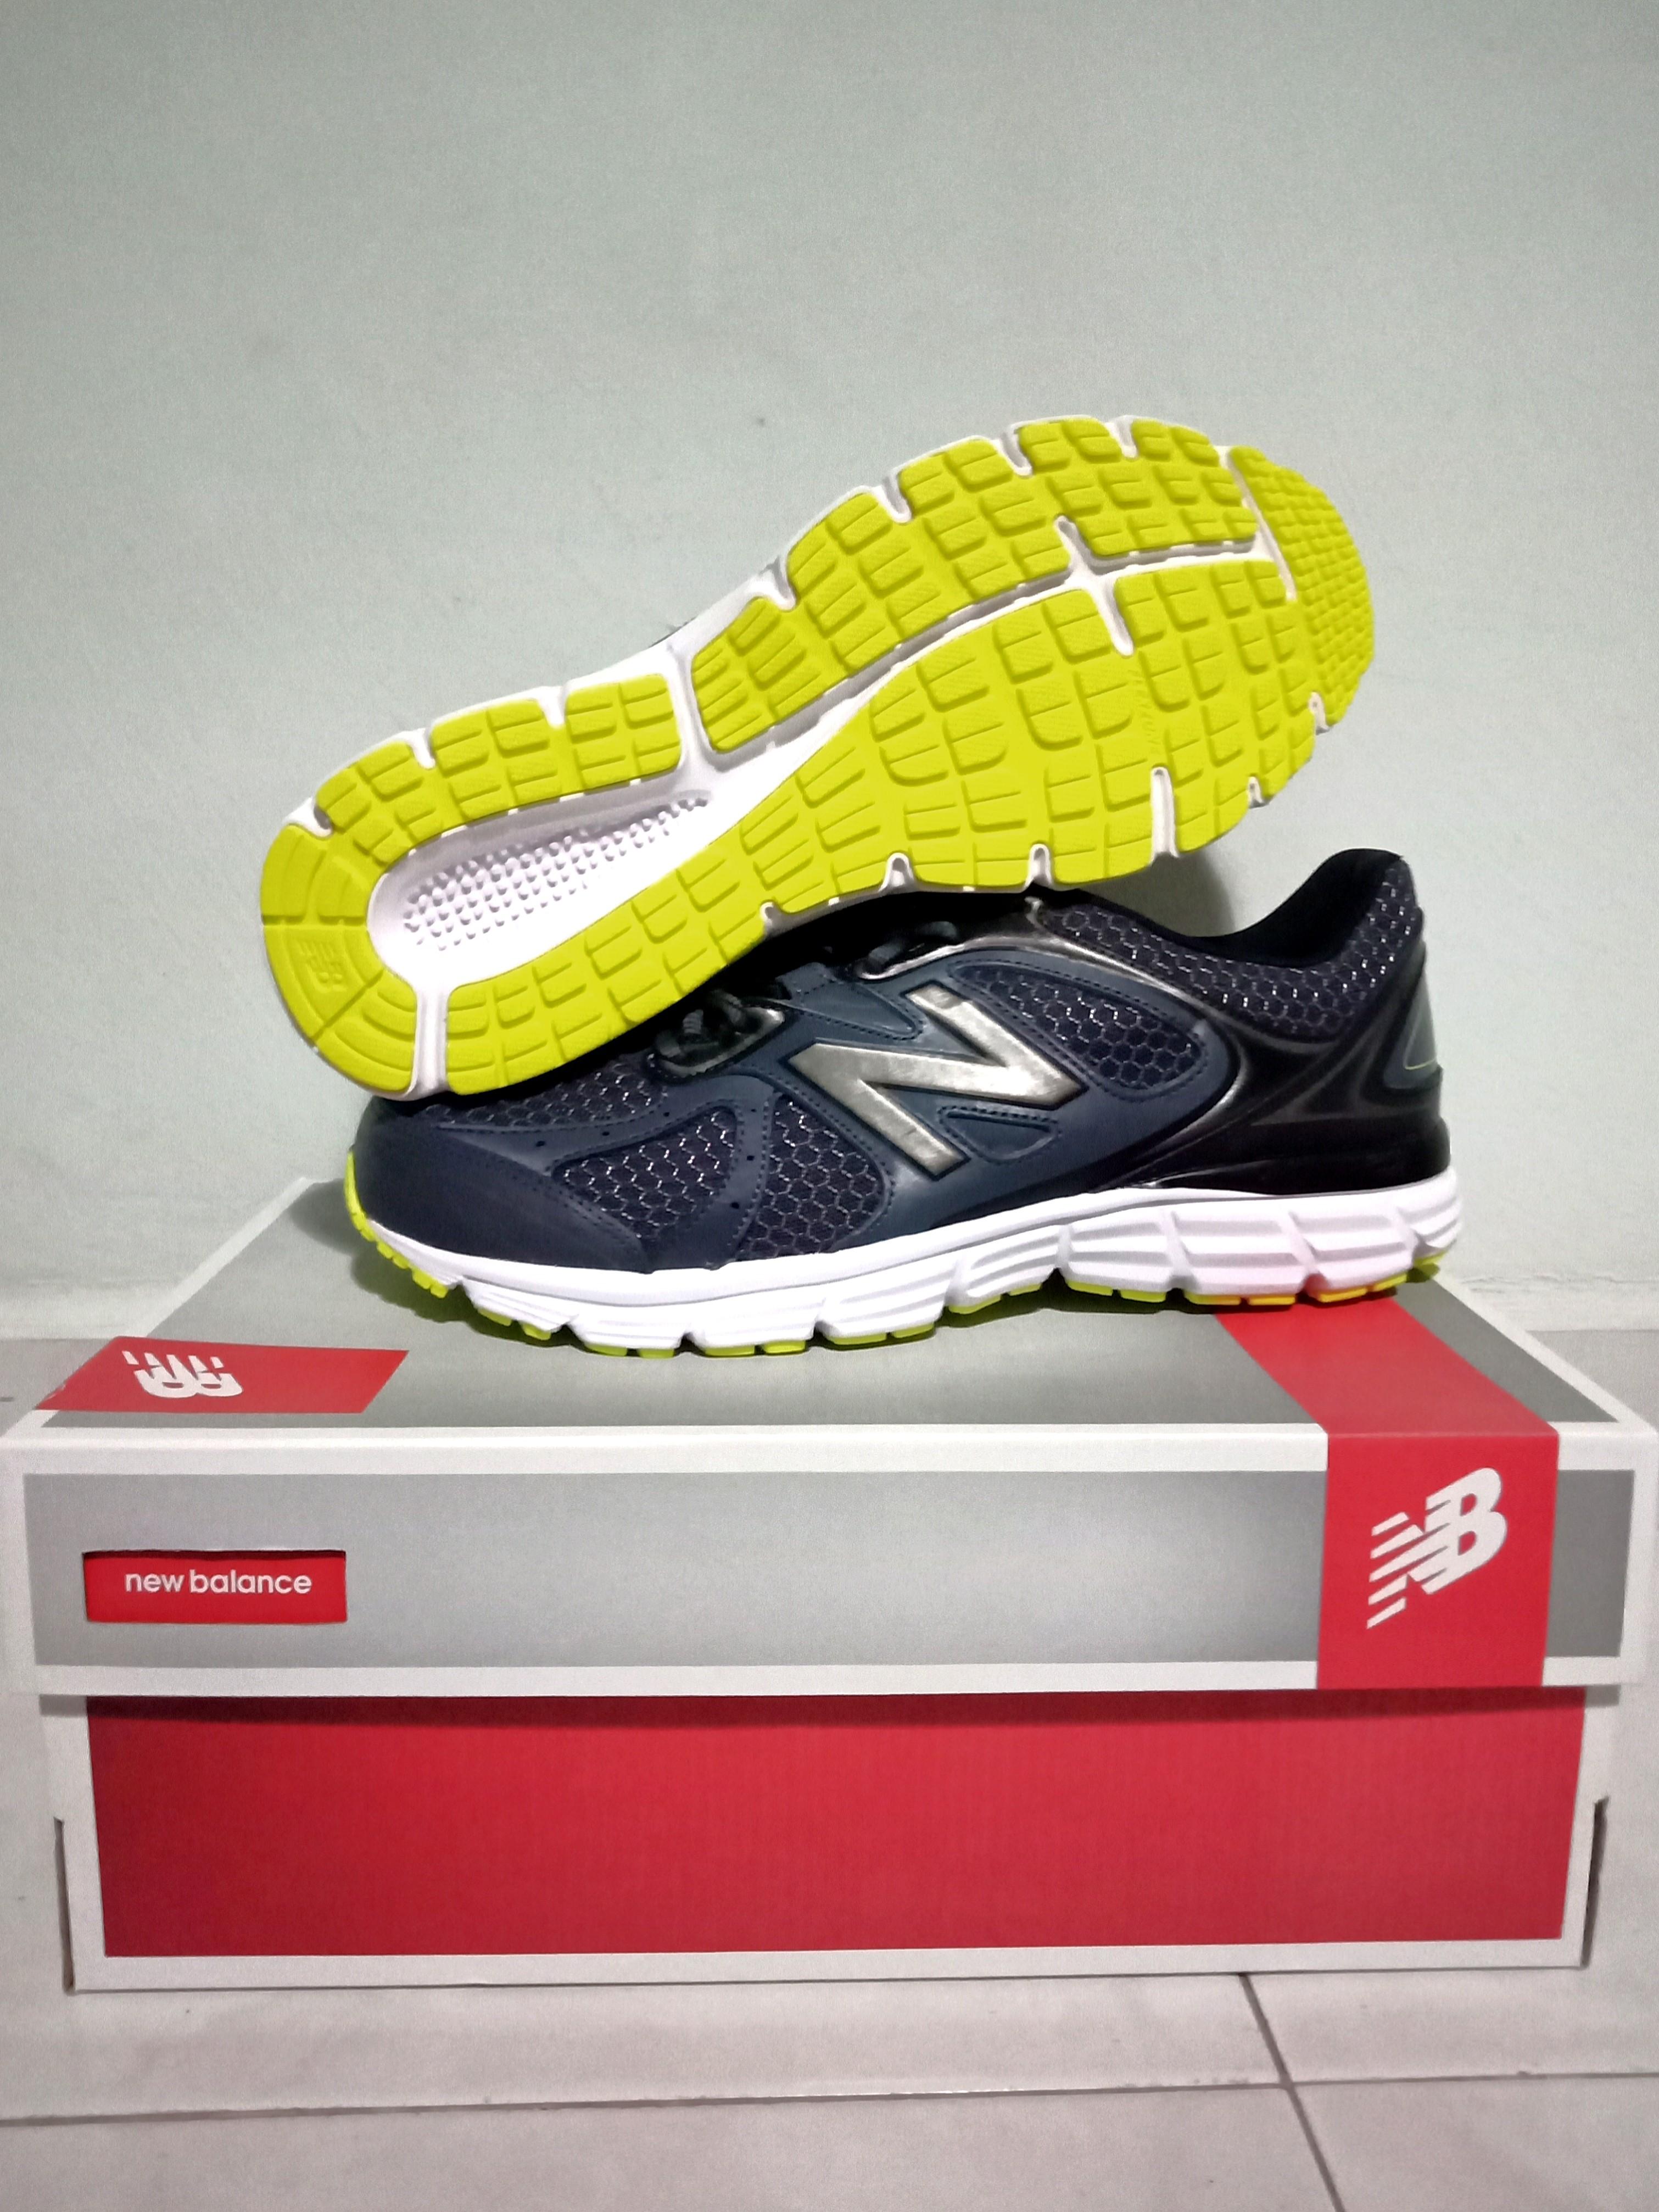 army new balance shoes